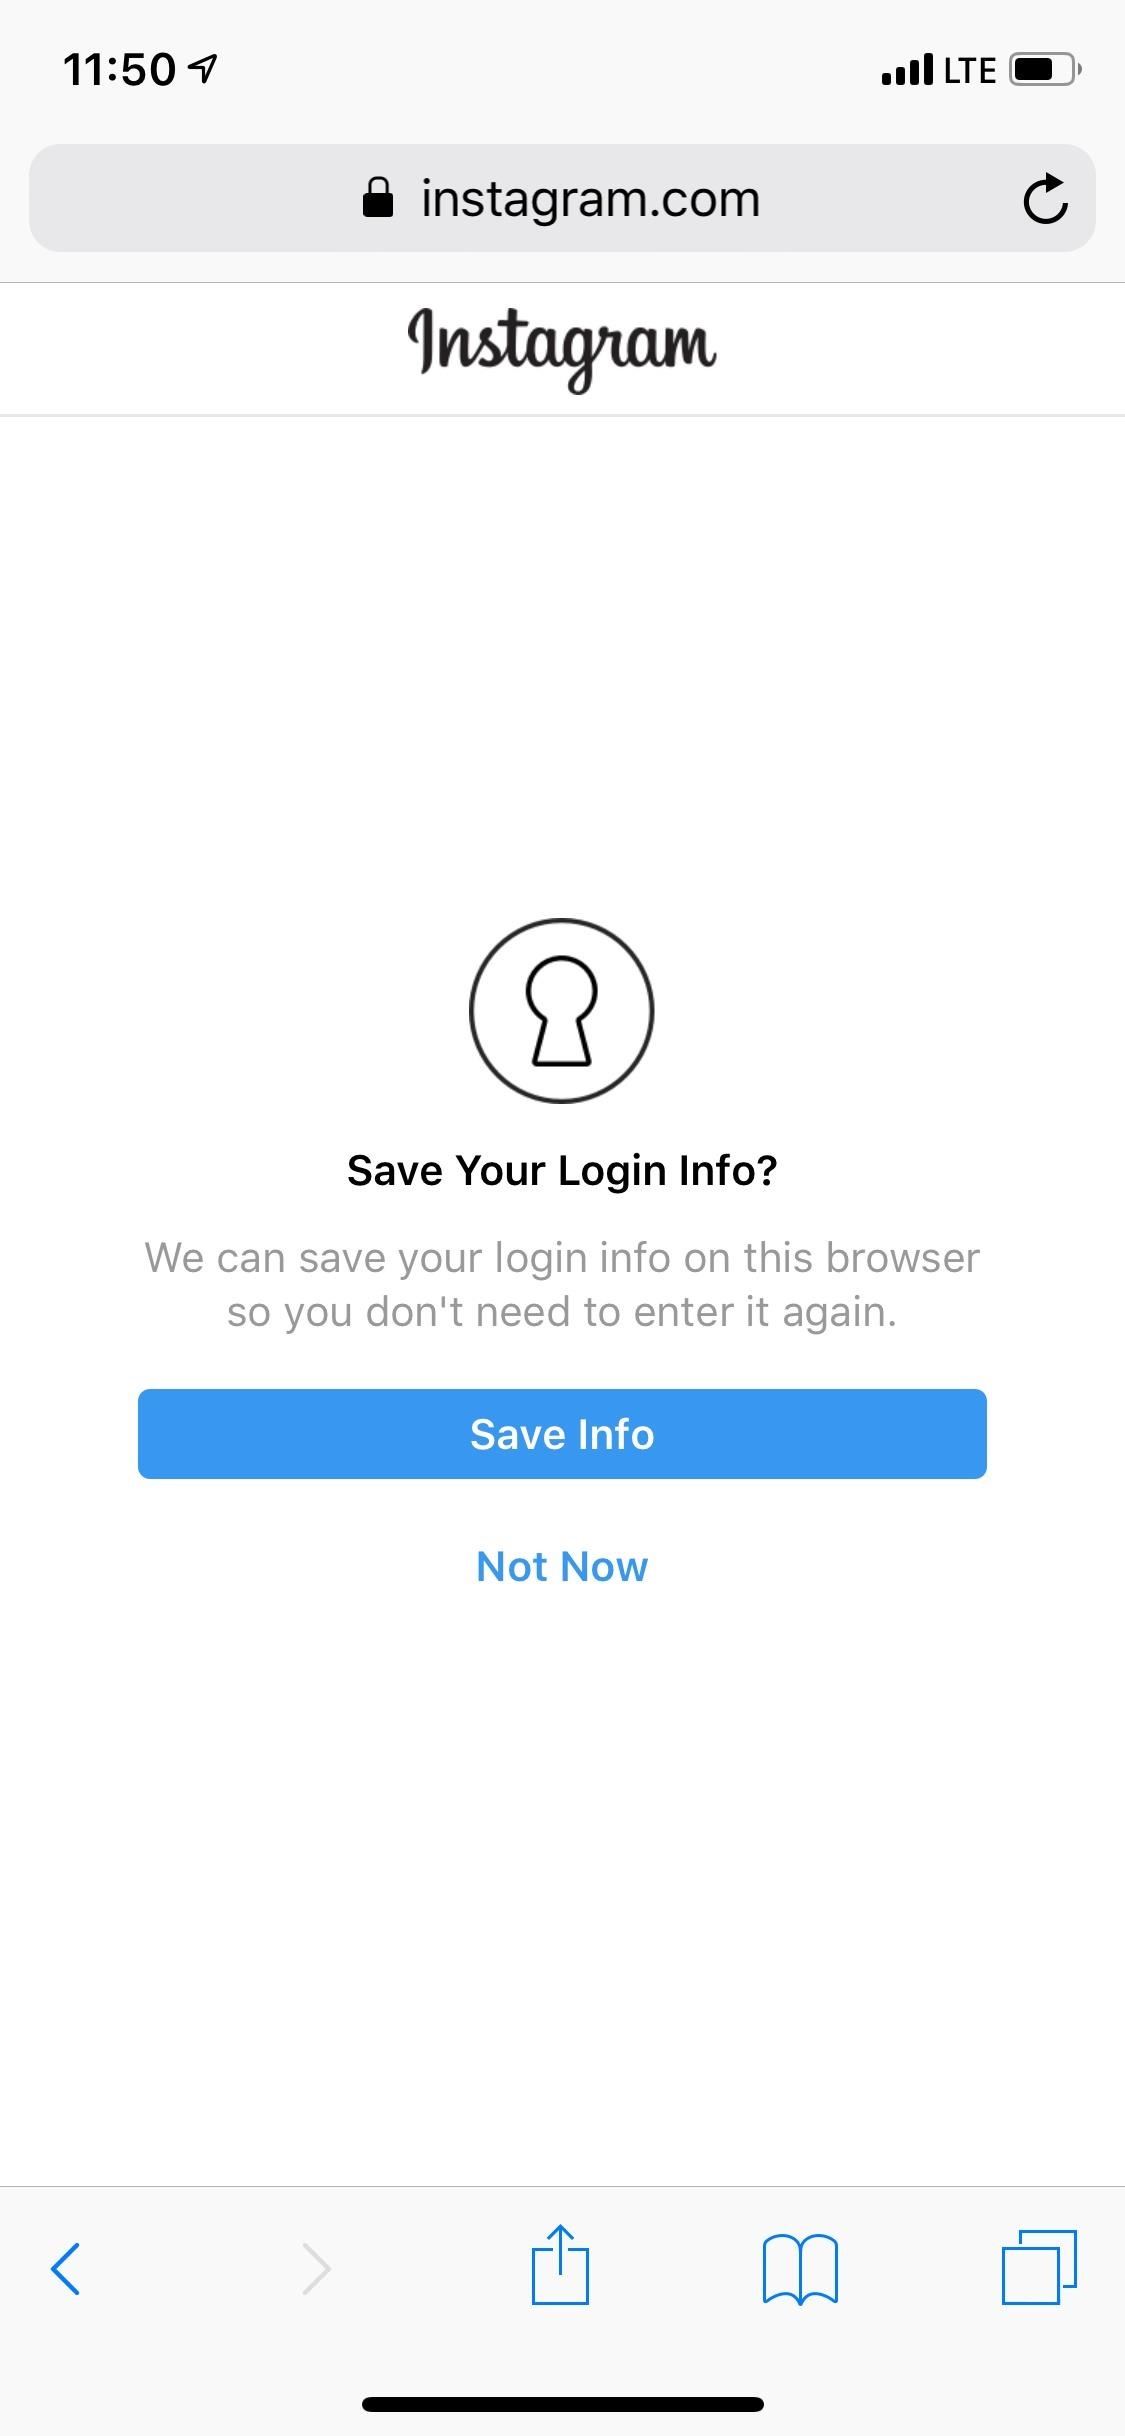 How to Stop Third-Party Apps You Never Authorized or No Longer Use from Accessing Your Instagram Account